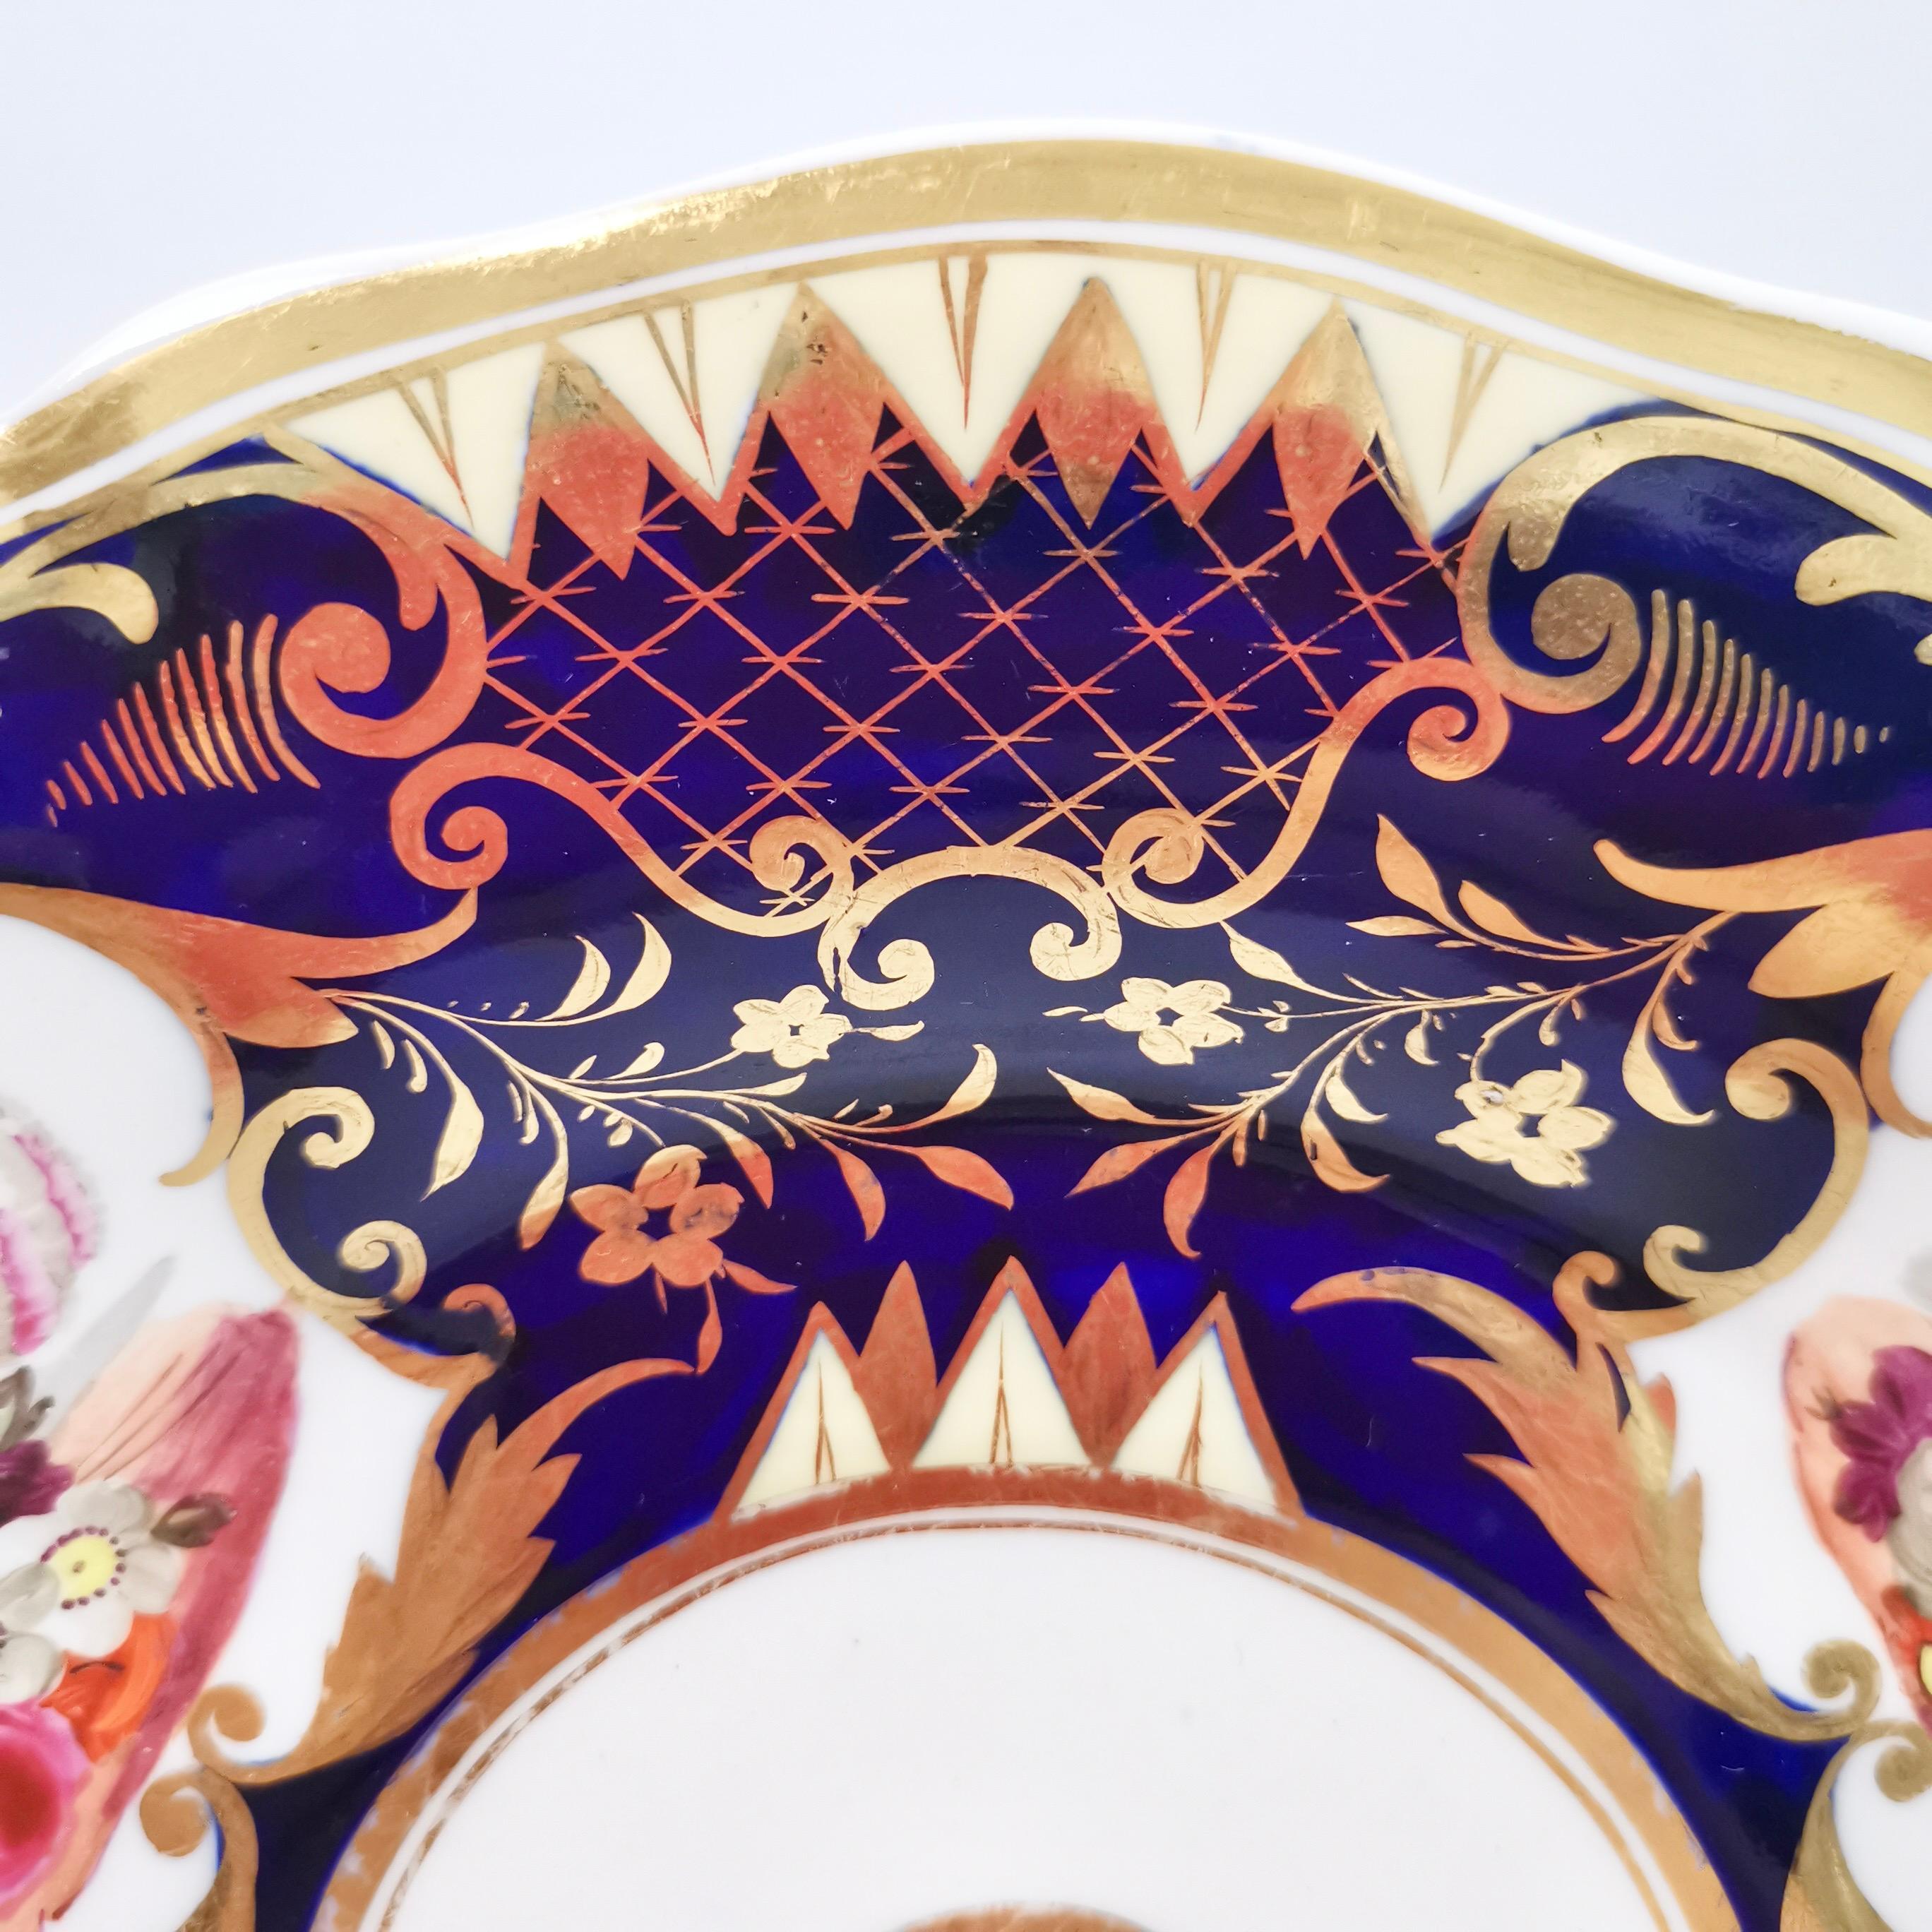 English Porcelain Plate Yates, Cobalt Blue with Gilt and Flowers, Regency ca 1826